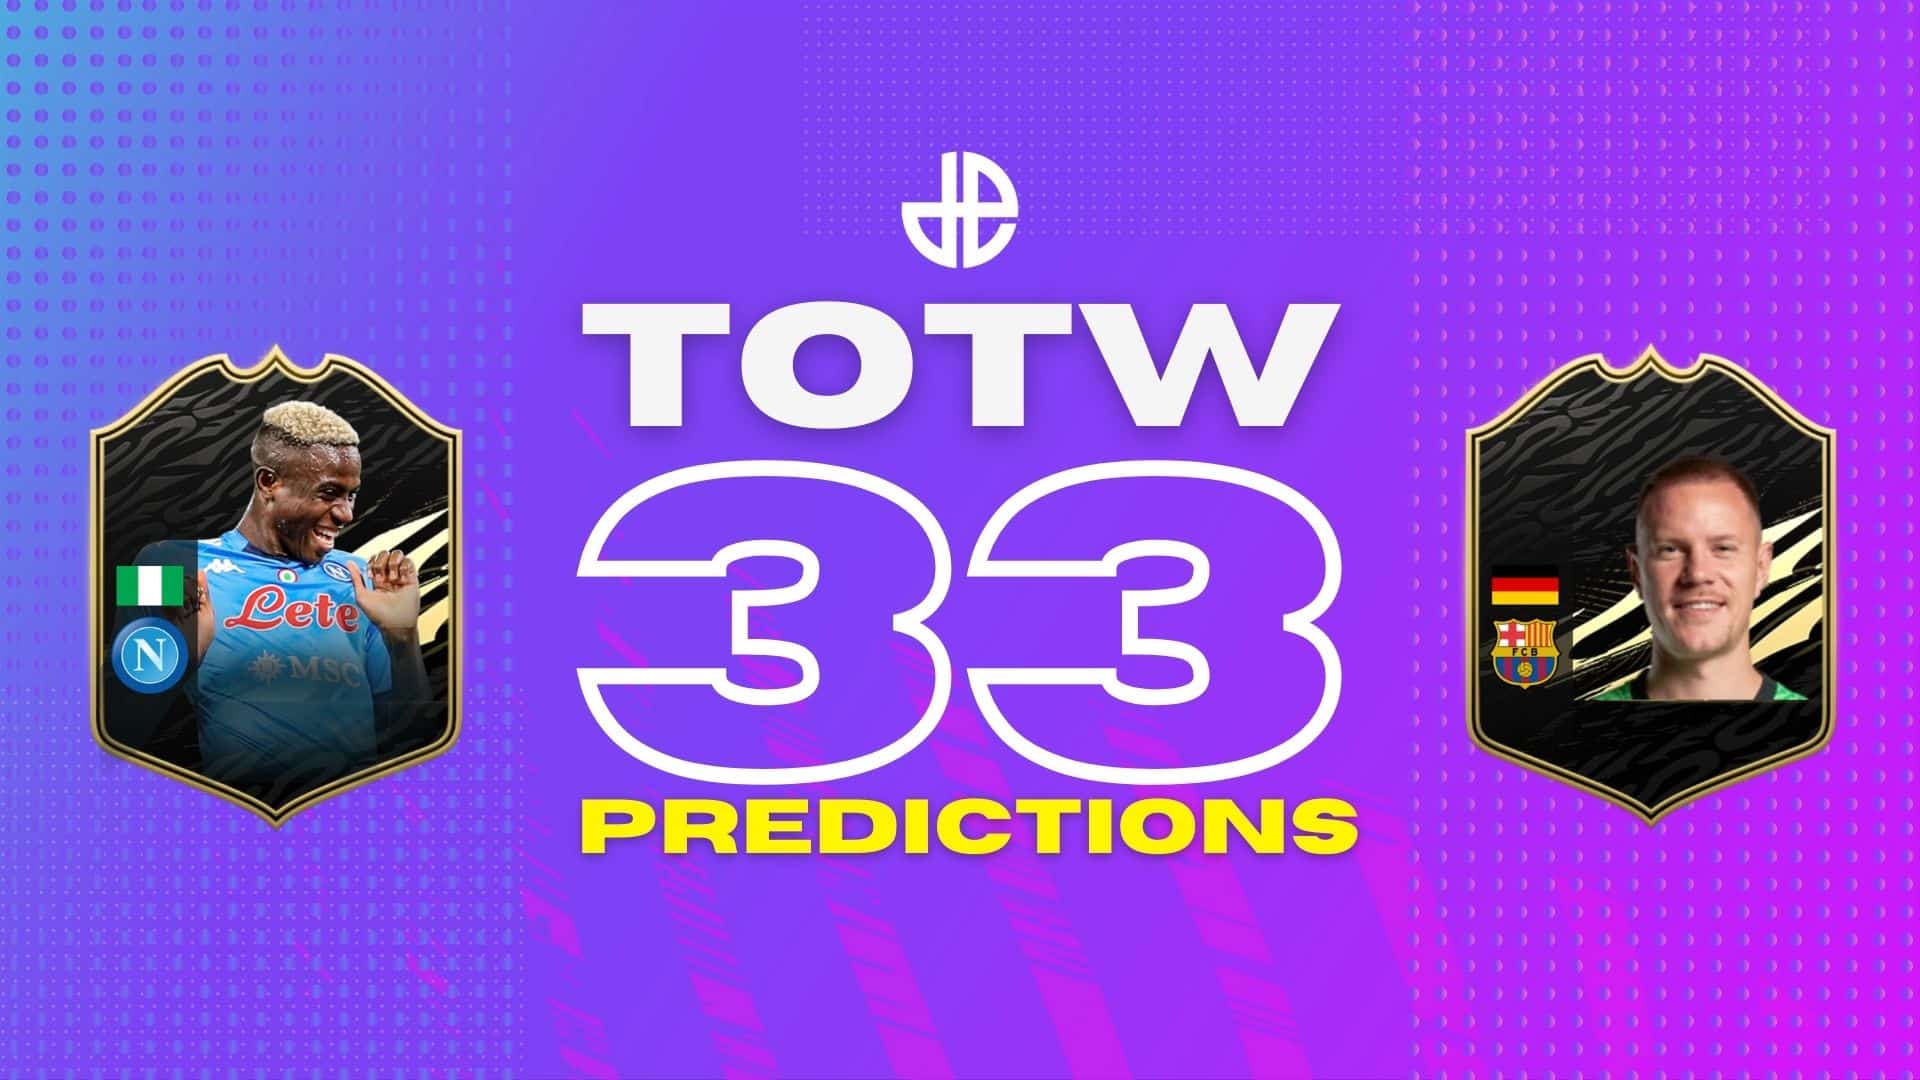 FIFA 21 TOTW predictions 33 with cards